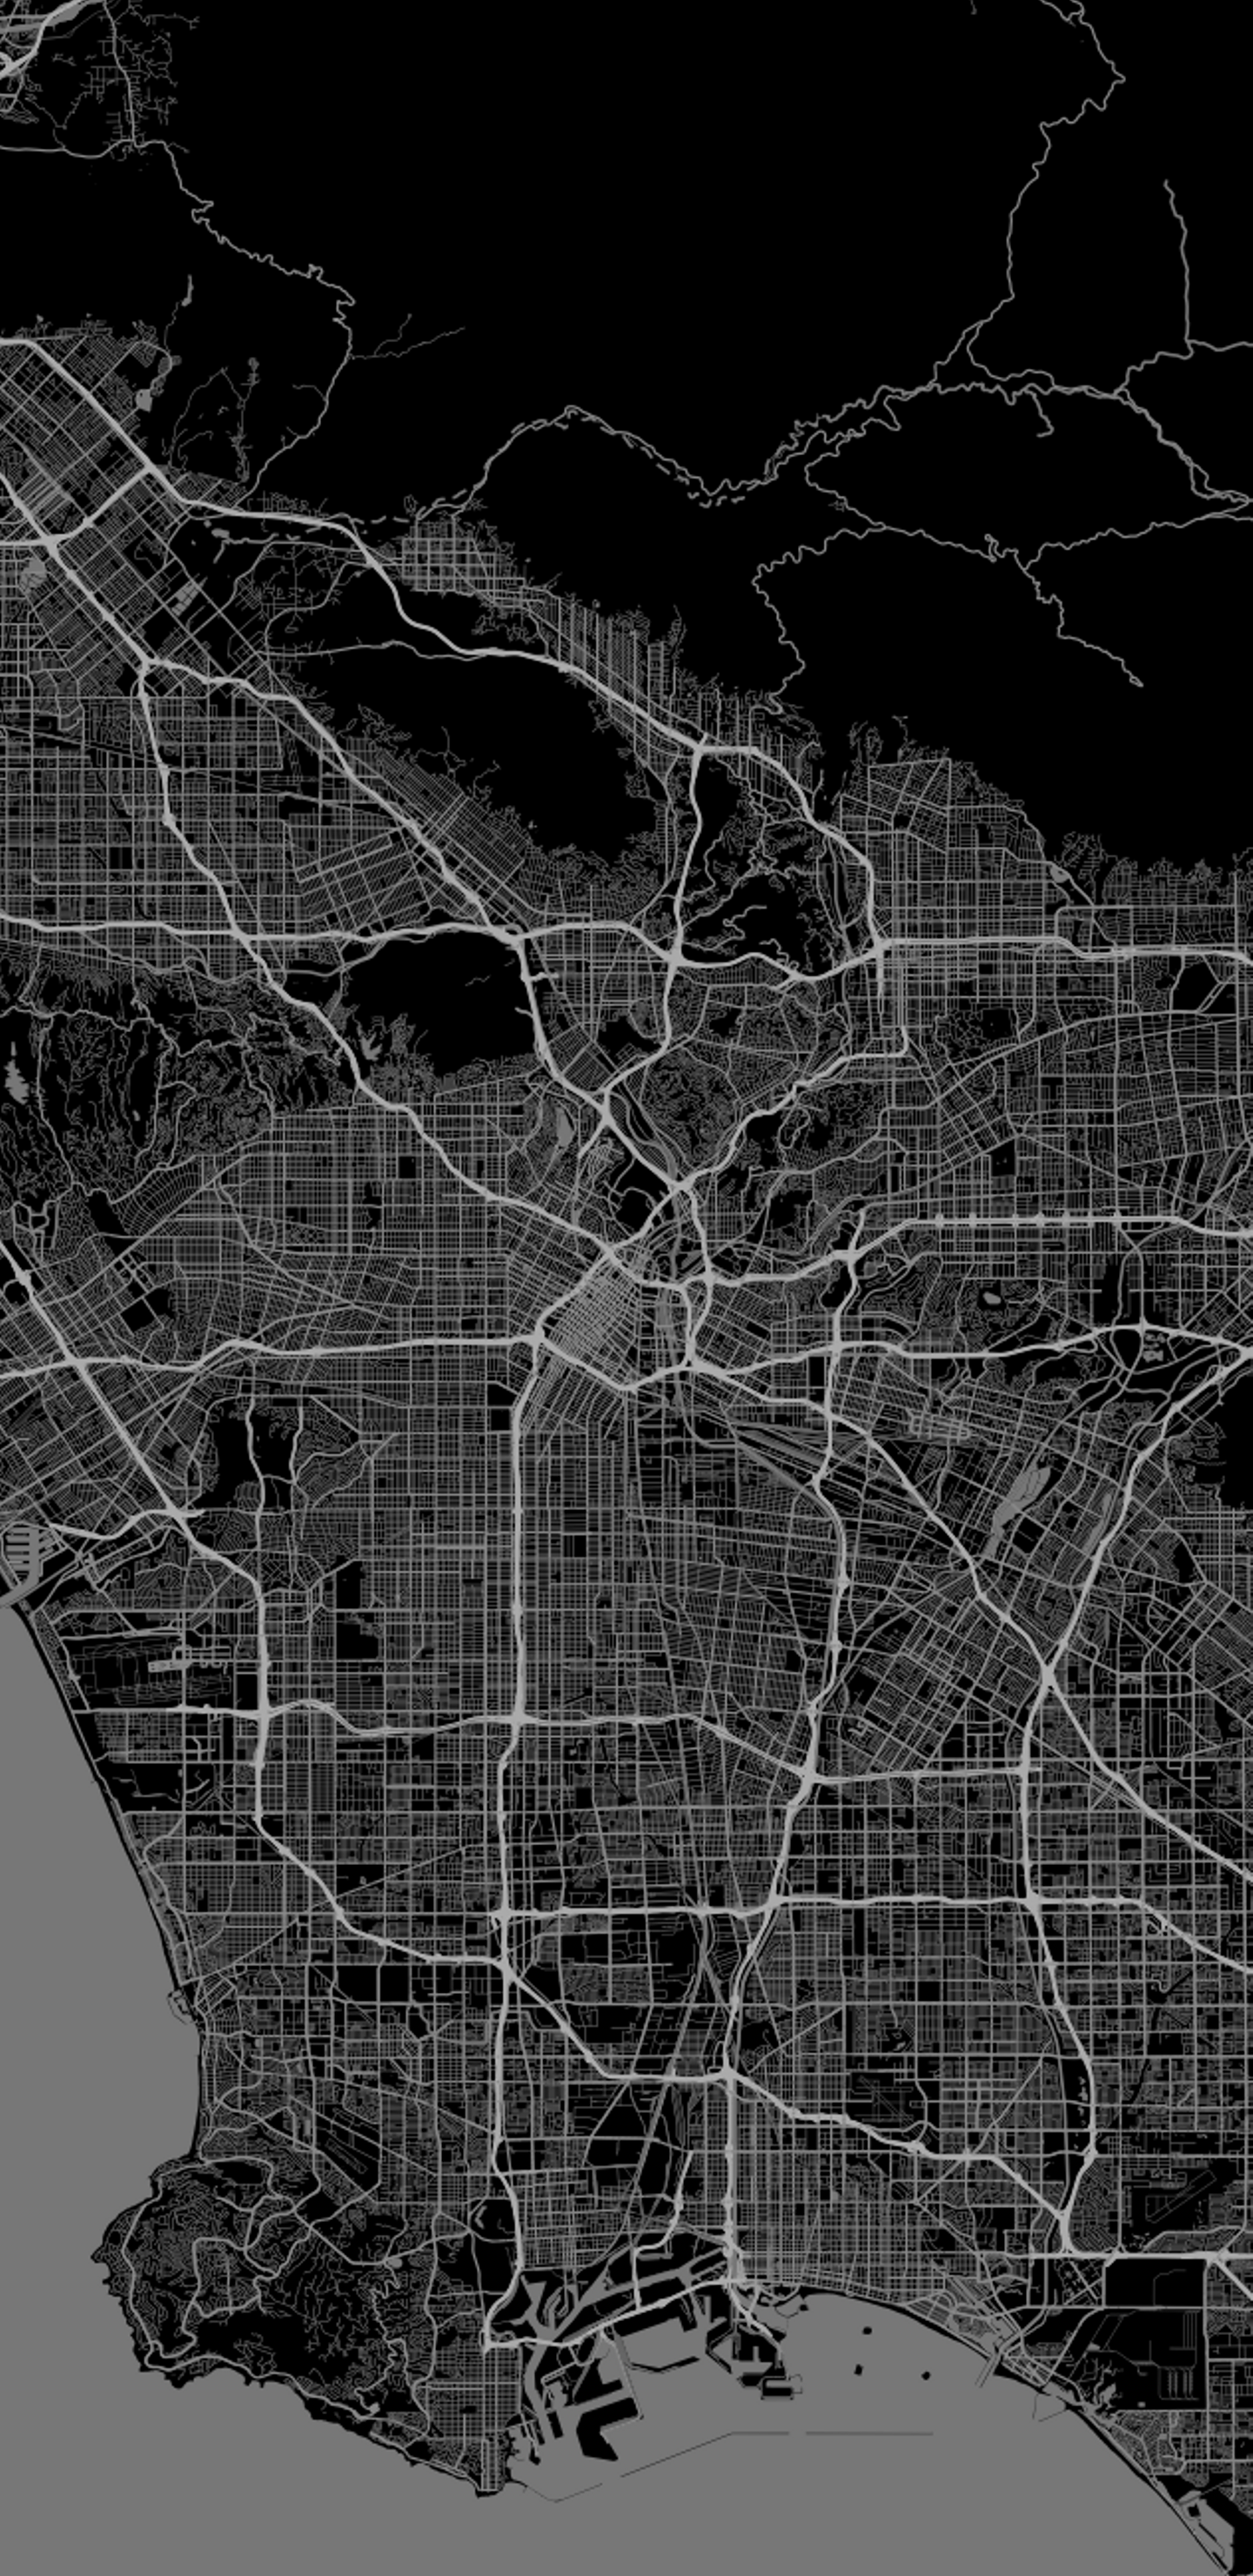 Los Angeles map cell phone wallpaper: LosAngeles